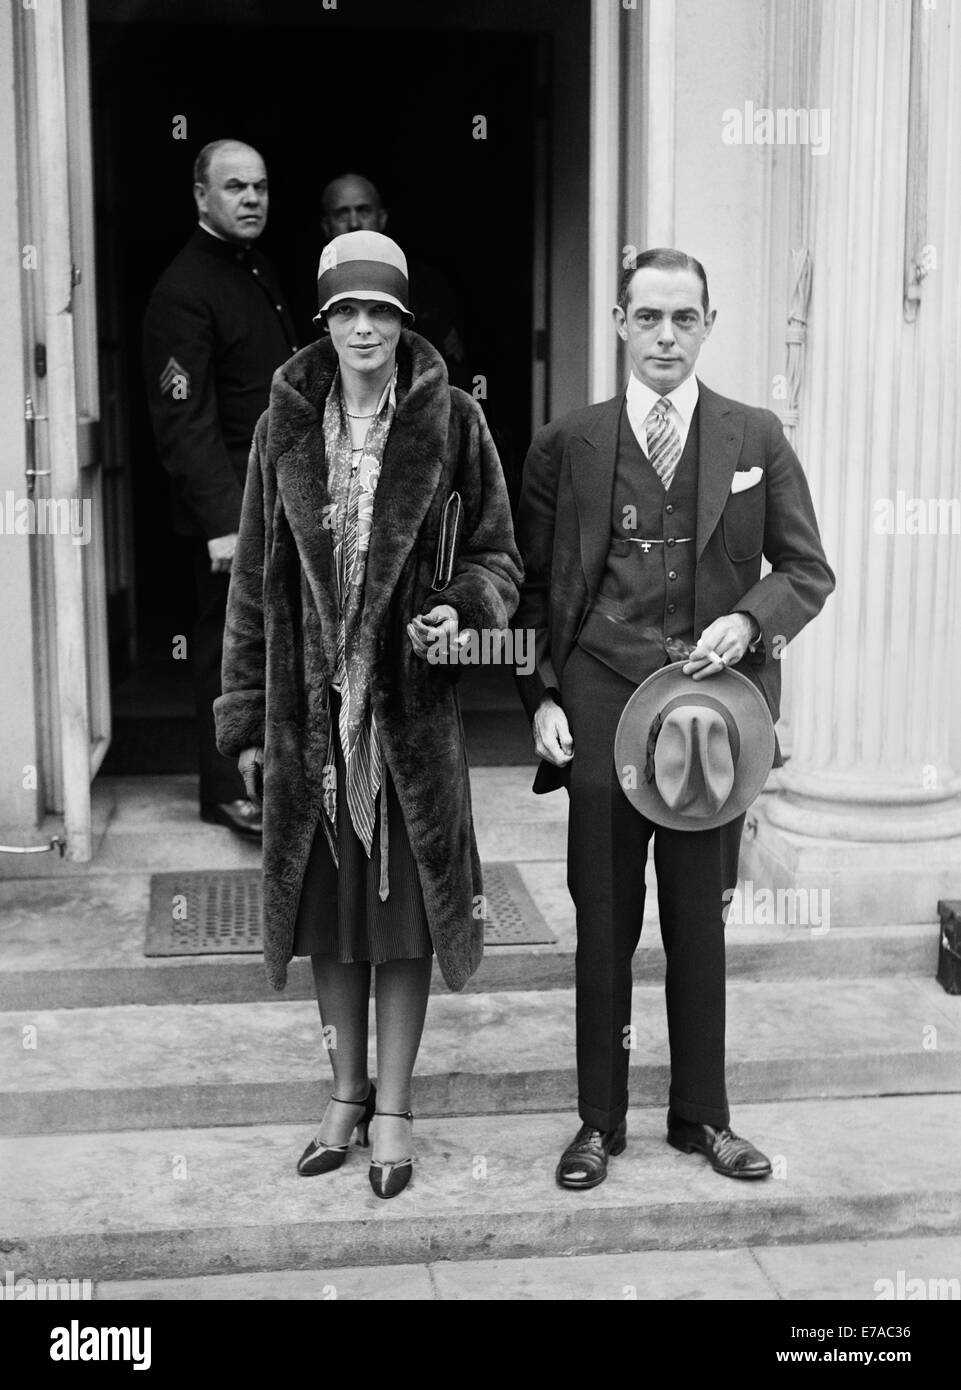 Vintage photo of American aviation pioneer and author Amelia Earhart (1897 – declared dead 1939) – Earhart and her navigator Fred Noonan famously vanished in 1937 while she was trying to become the first female to complete a circumnavigational flight of the globe. Earhart is pictured in November 1928 outside The White House during a visit to see President Calvin Coolidge. Alongside her is Porter Adams, President of the National Aeronautic Association. Stock Photo